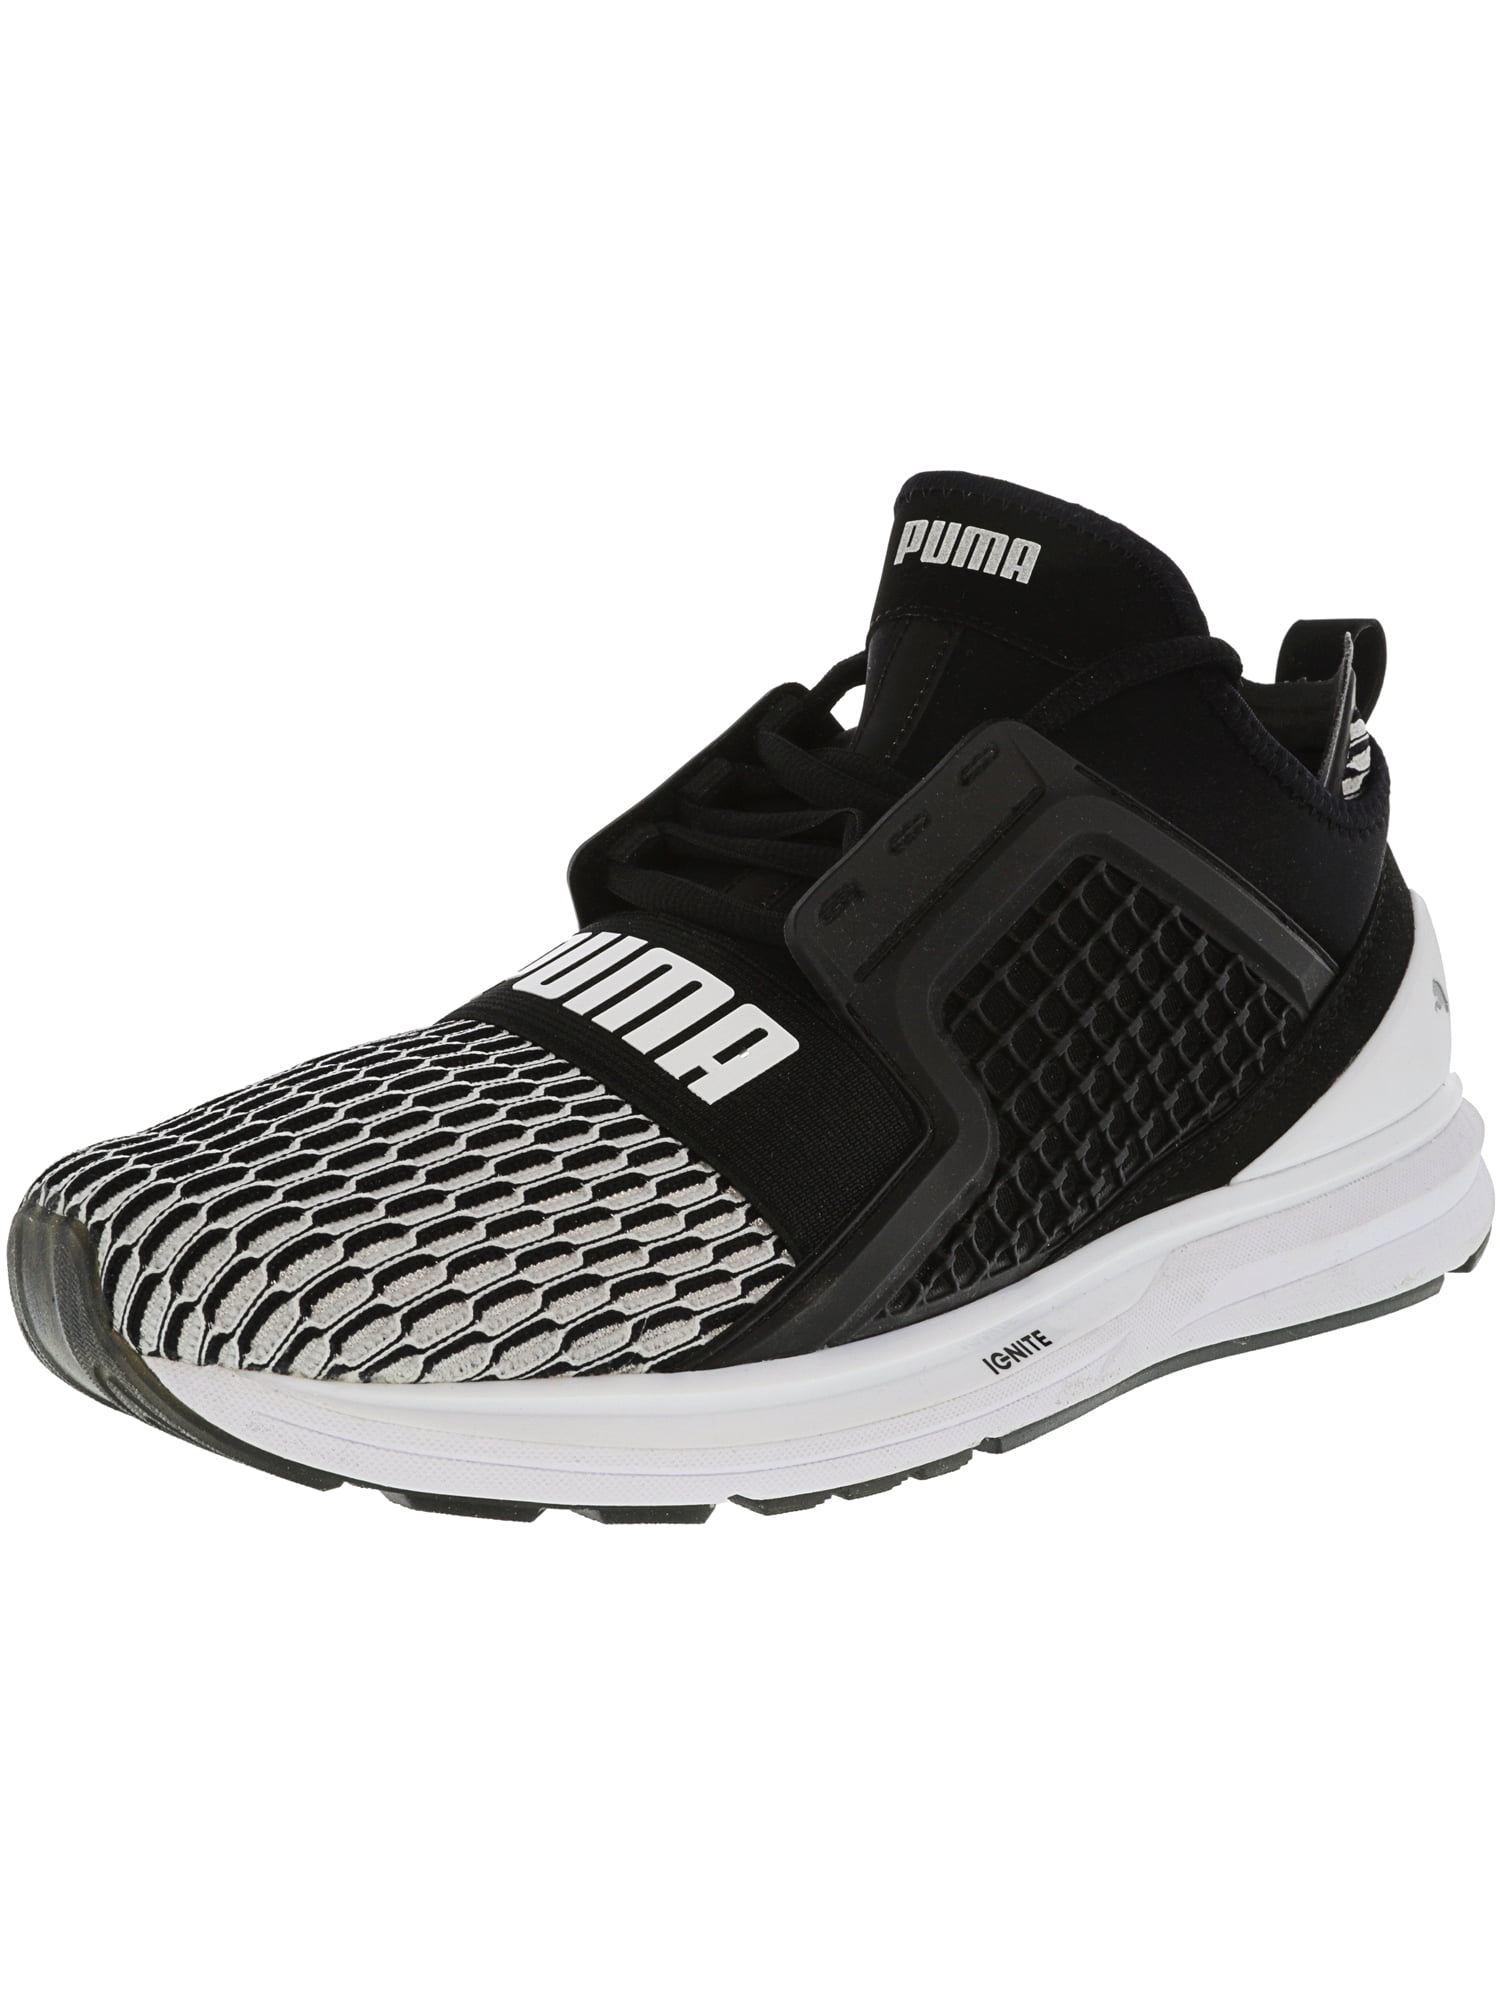 puma high ankle shoes for men